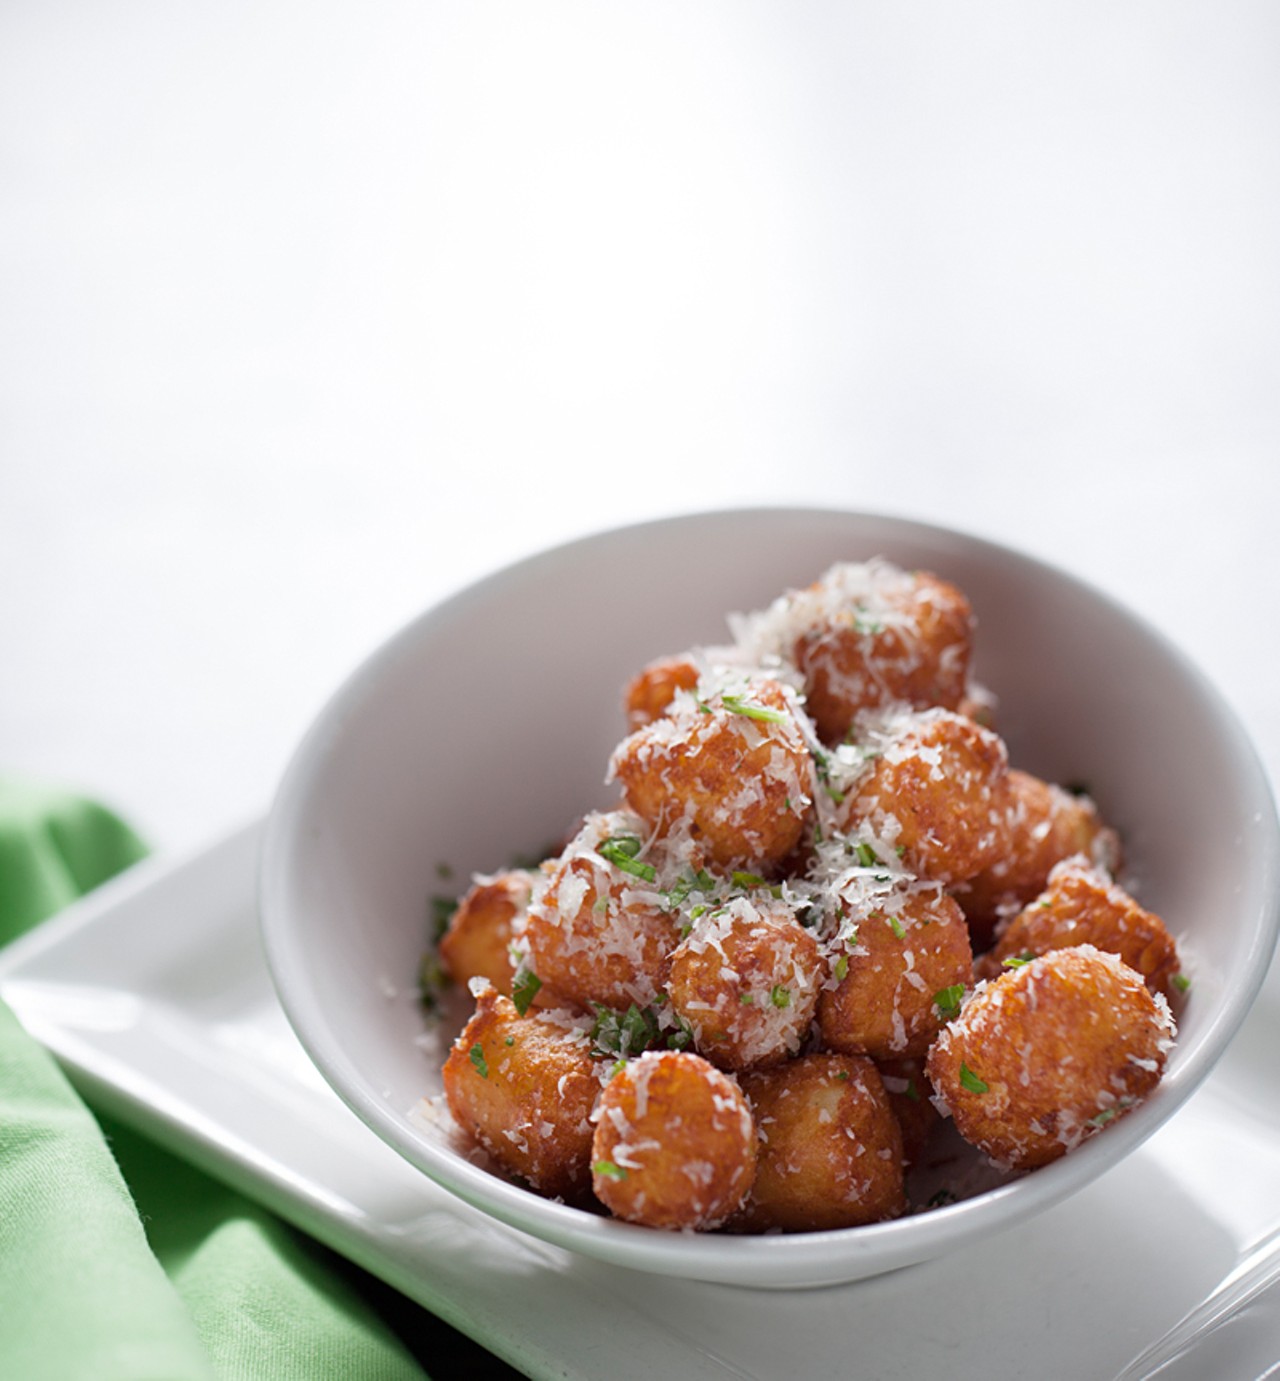 A side of "Truffled Tater Tots."